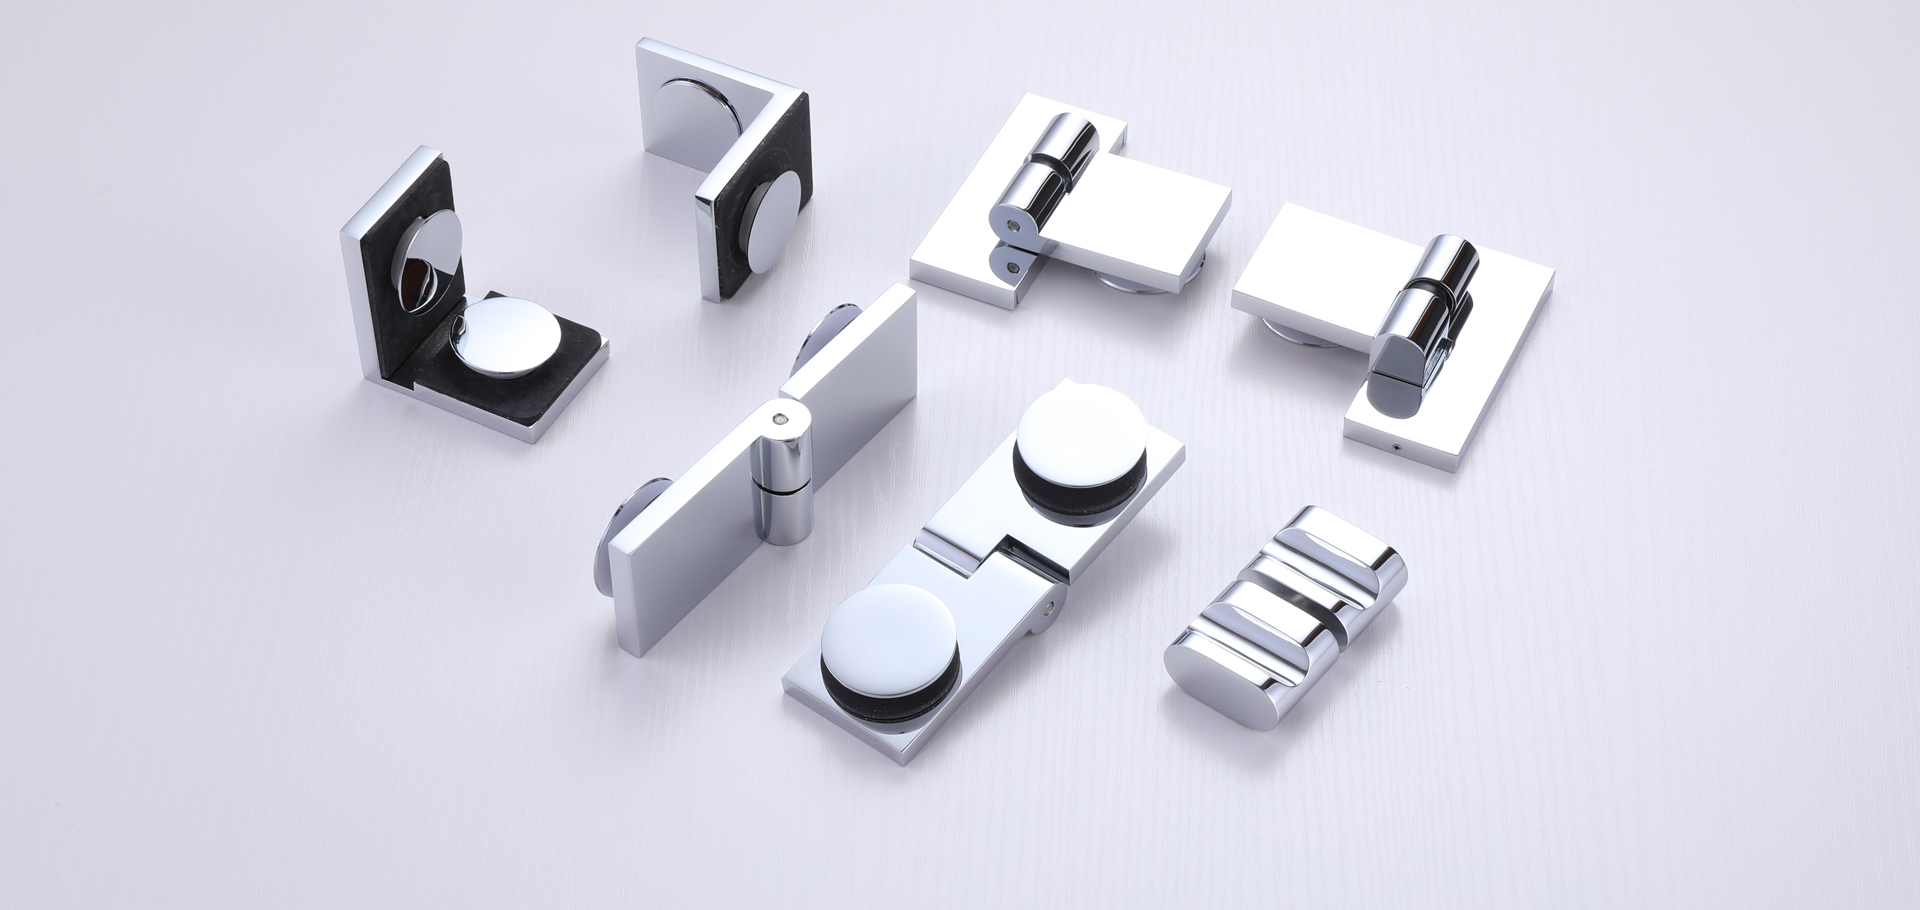 Types of shower door hardware available at King Hardware, such as full sliding shower door systems, frameless double sliding shower doors, wall mount hinges , glass to glass hinges, pull handles and support bars.